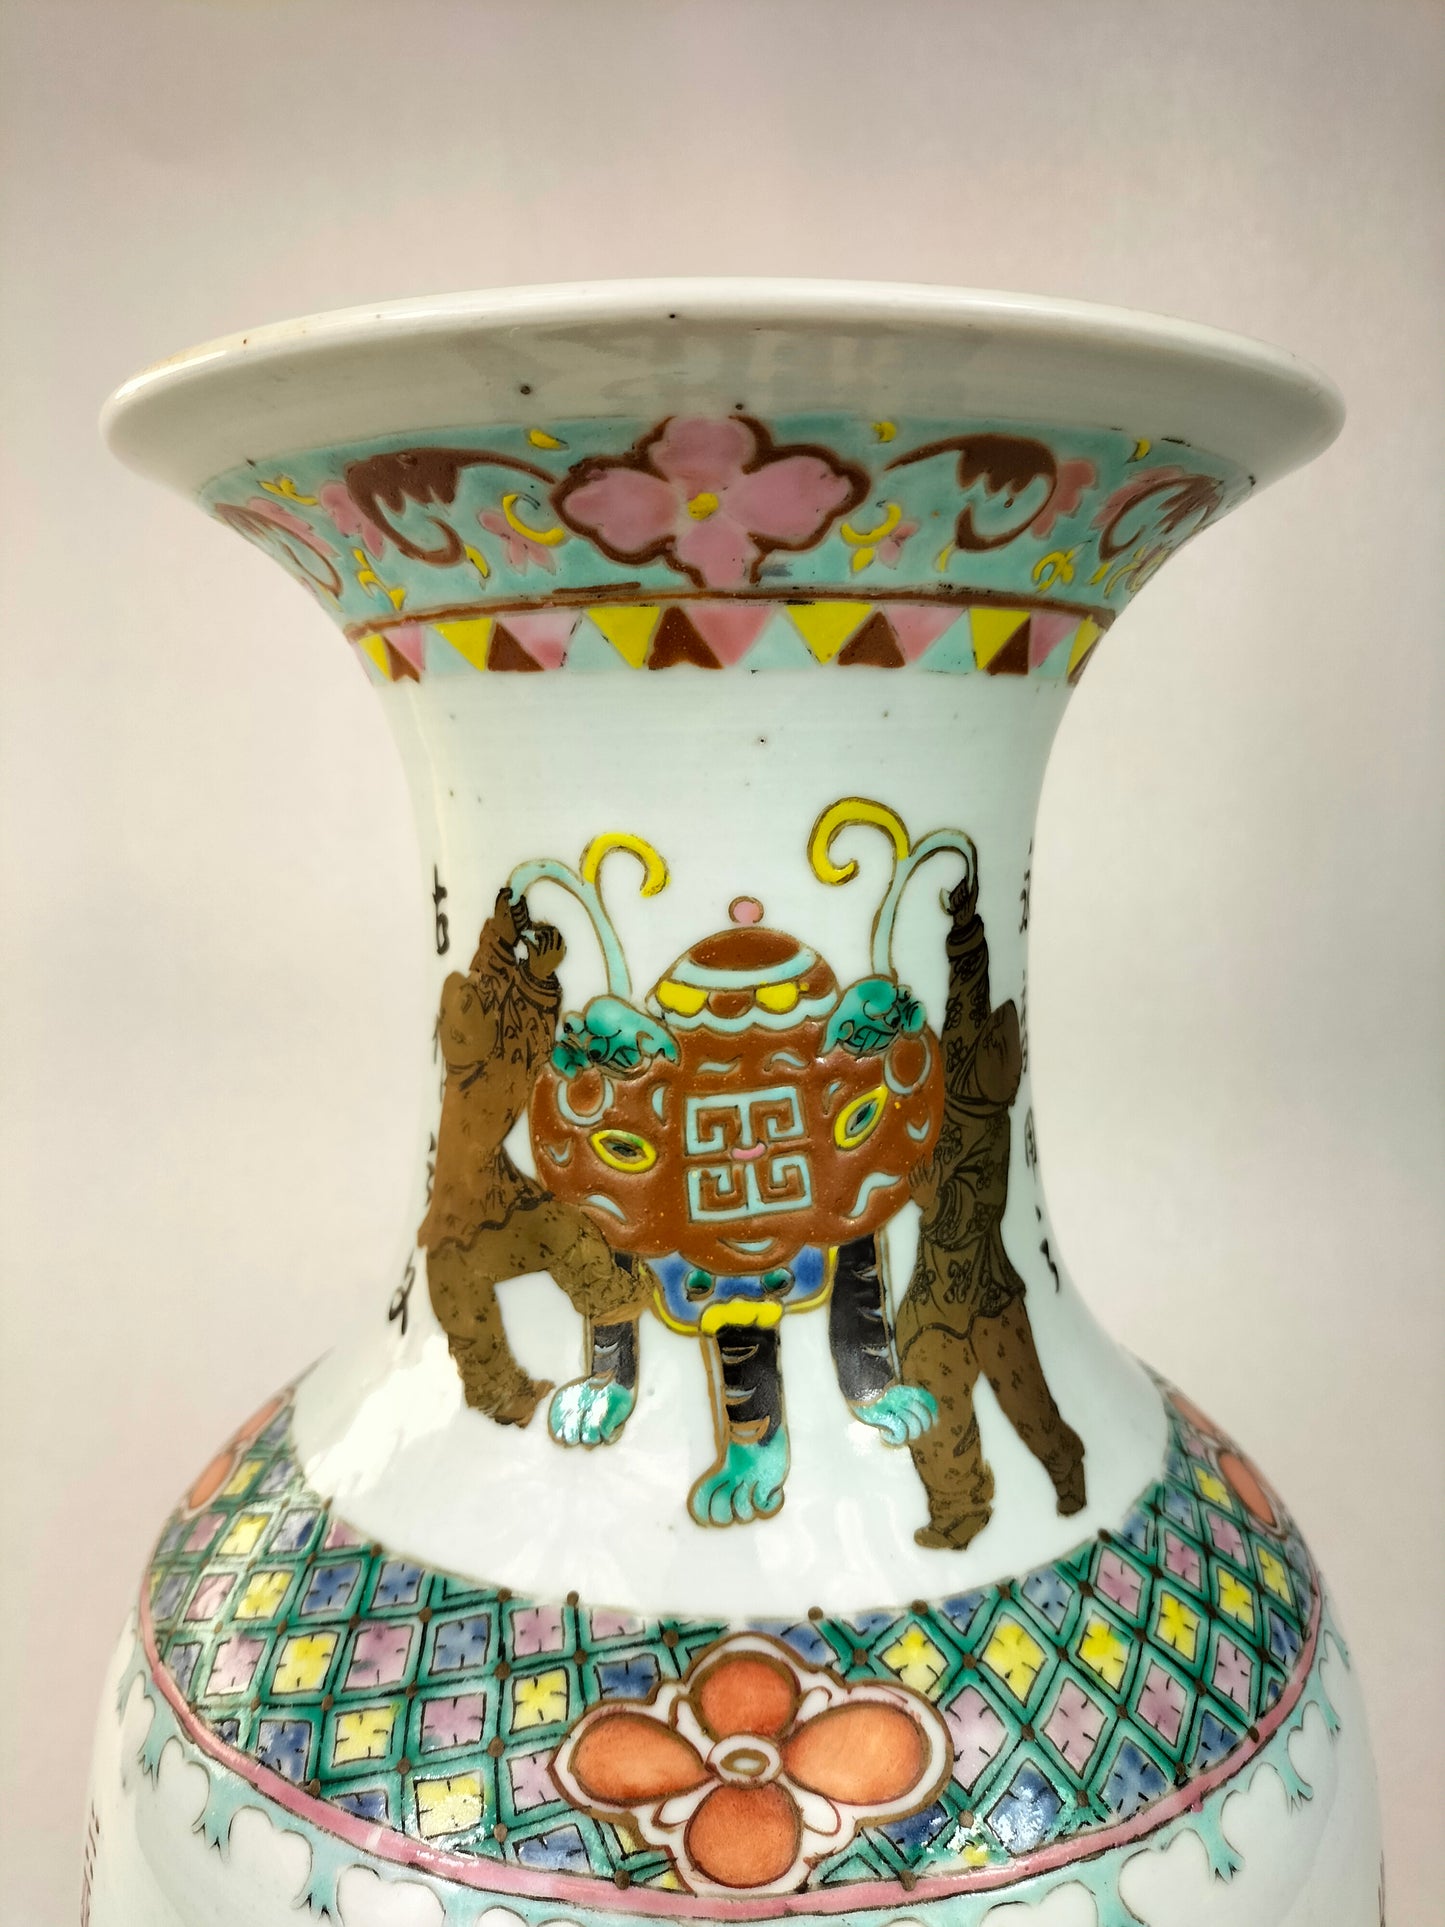 Antique Chinese famille rose vase decorated with flower baskets and figures // Qing Dynasty - 19th century